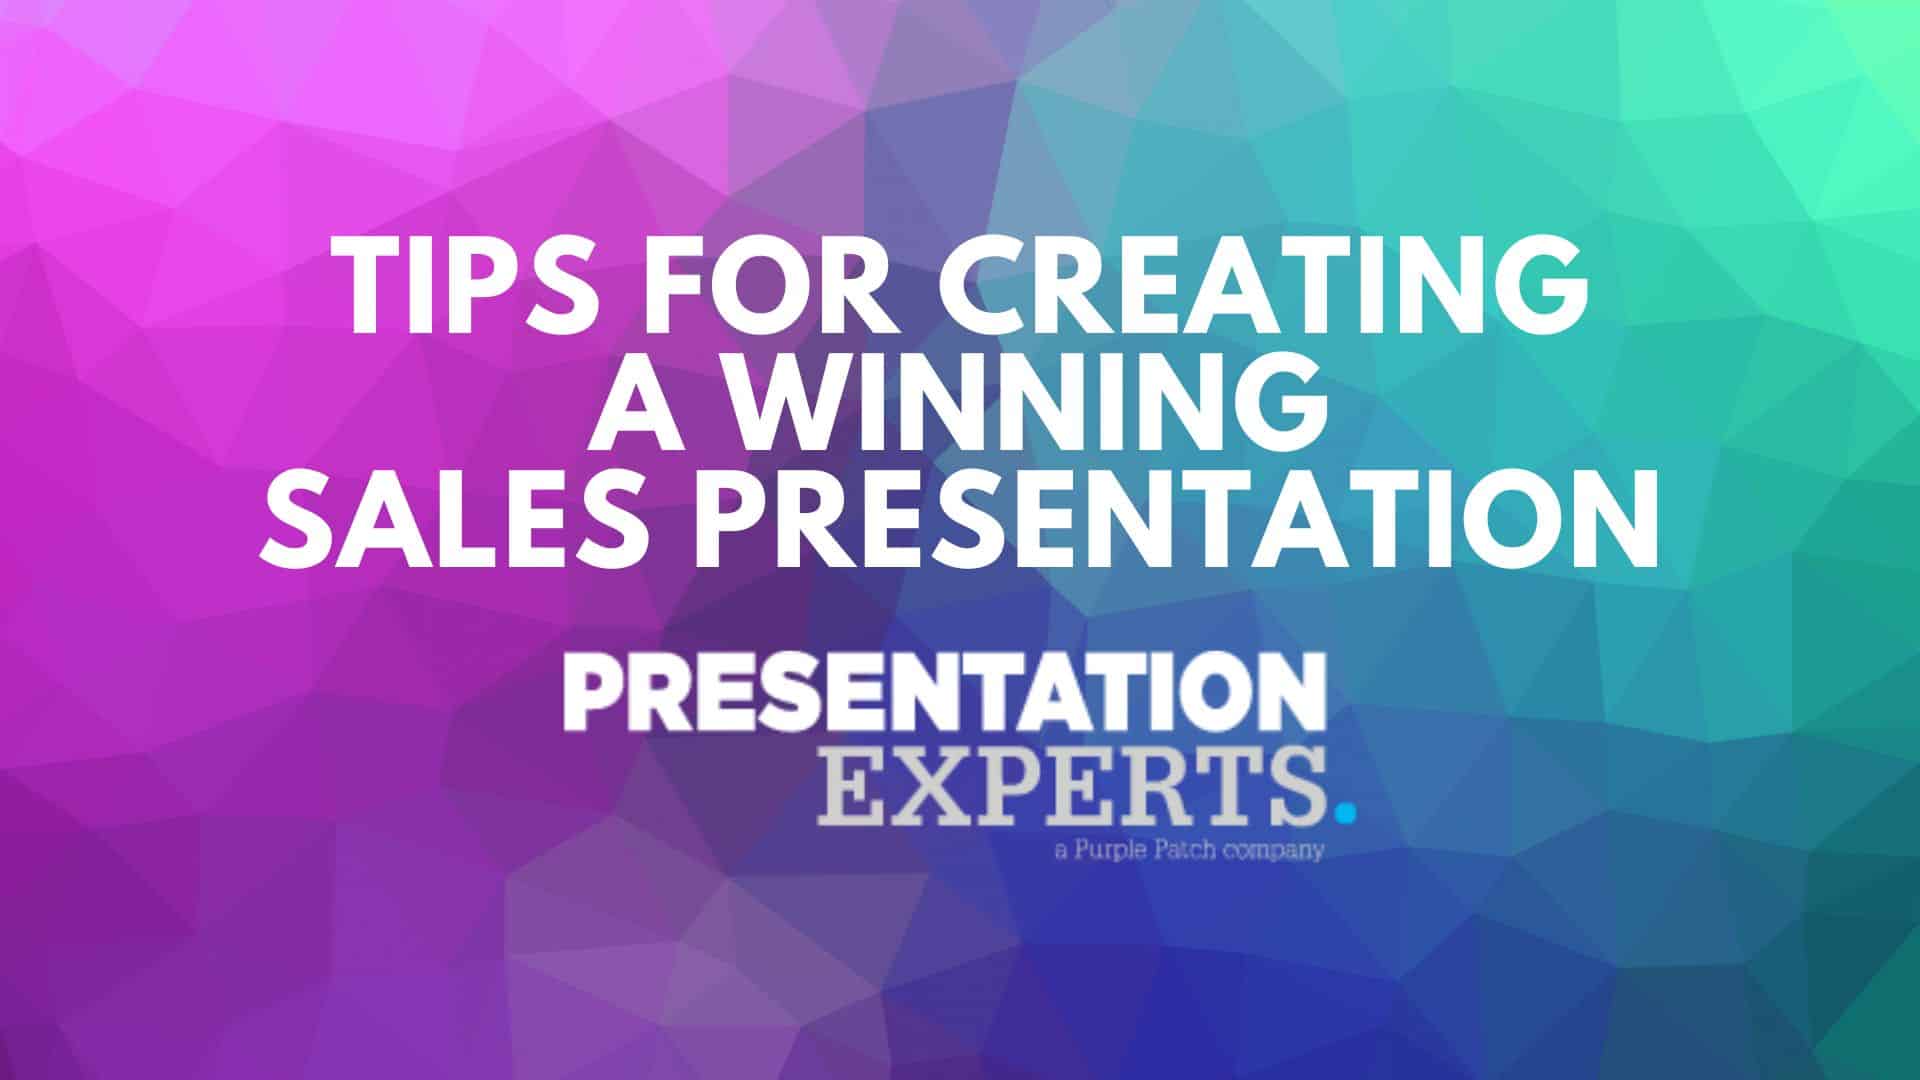 Tips for Creating a Winning Sales Presentation